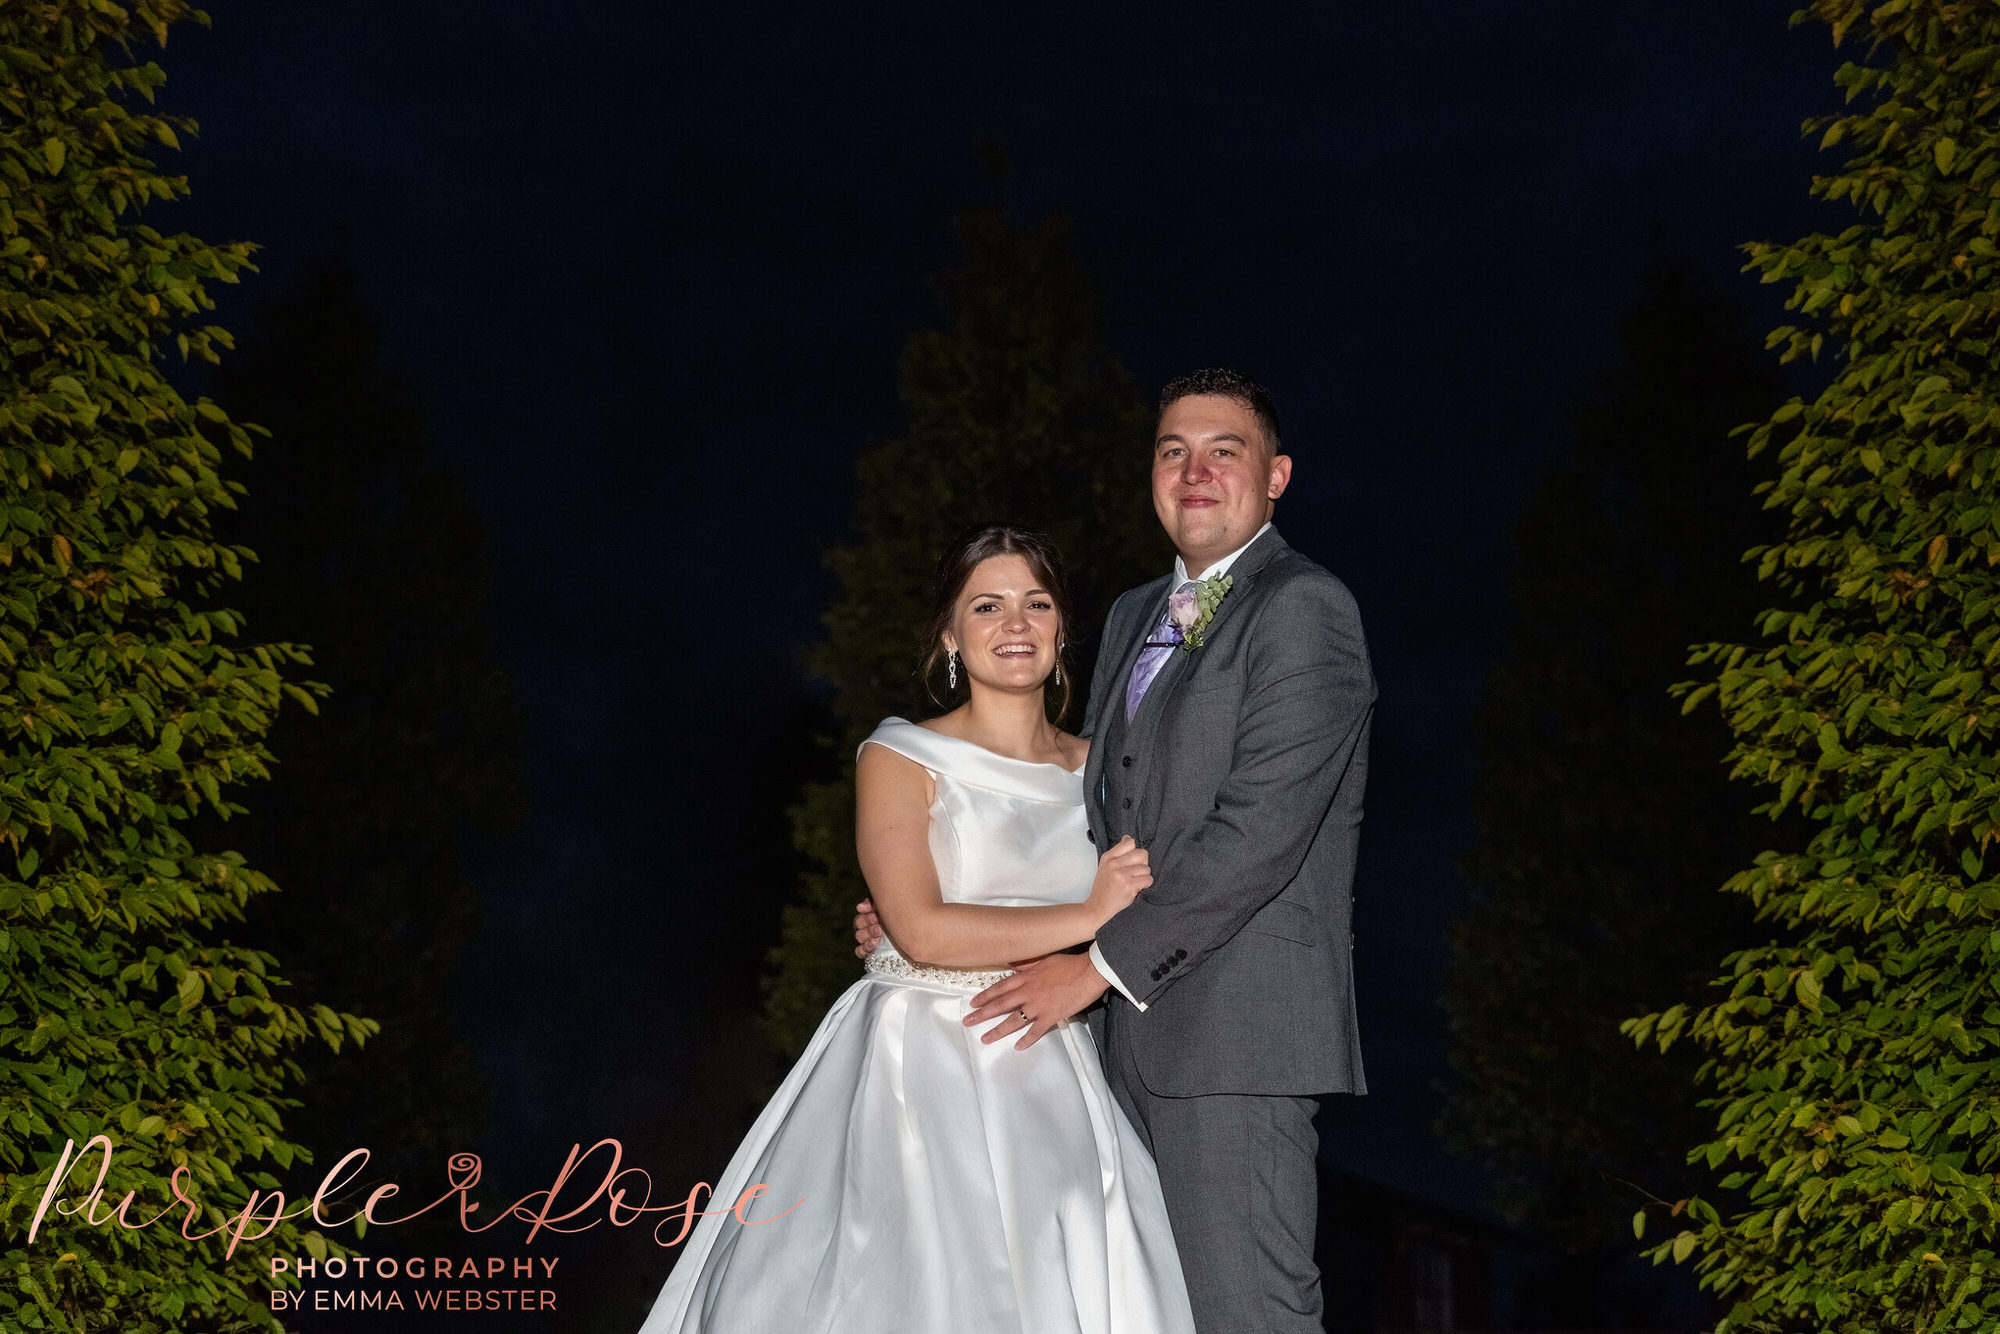 Night time photo of couple on their wedding day